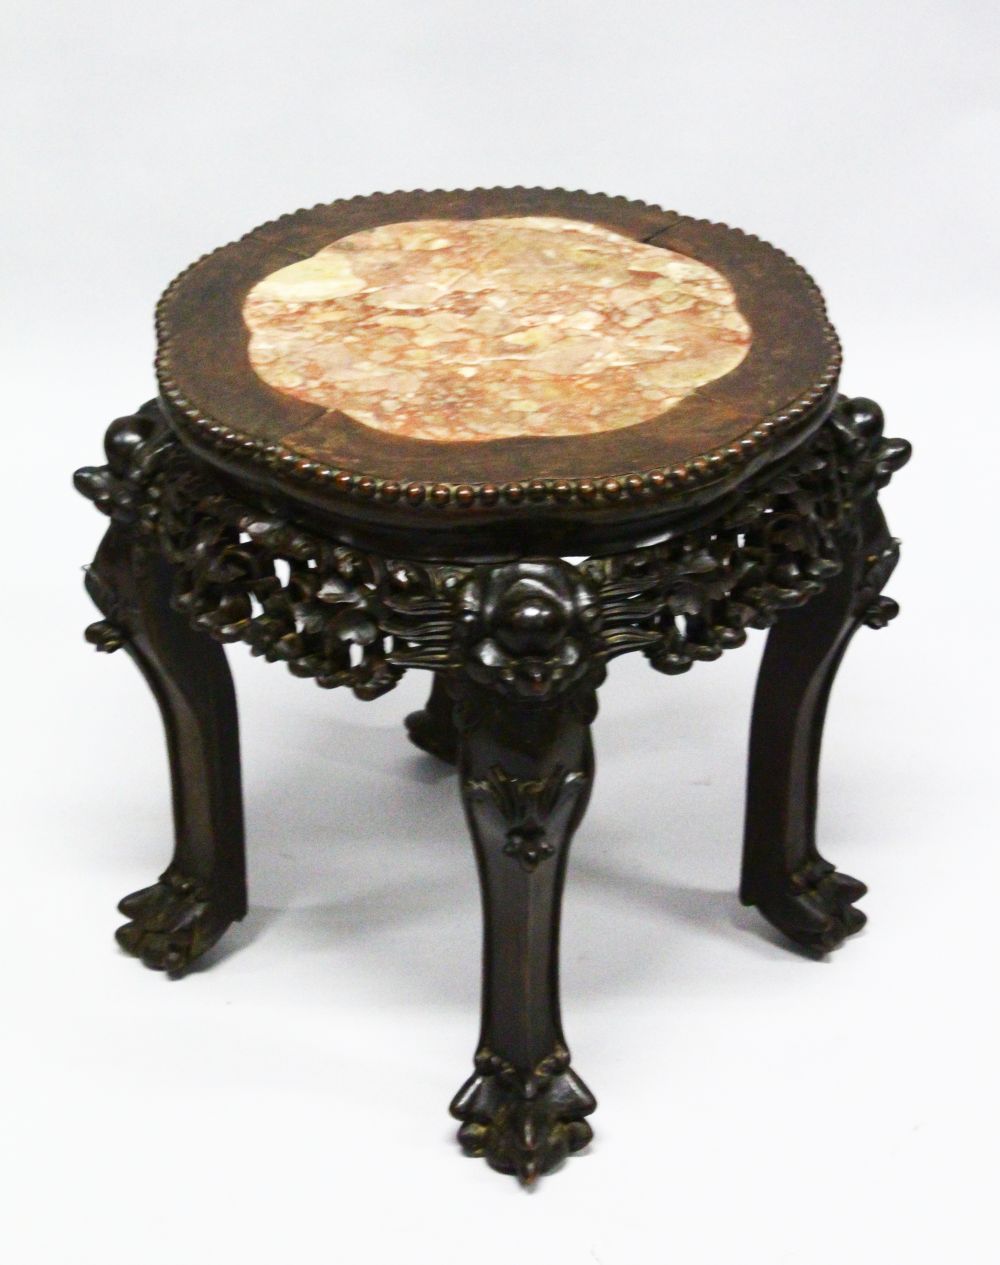 A GOOD CHINESE 19TH CENTURY HARDWOOD MARBLE TOP PLANT STAND, the top inset with marble, the frieze